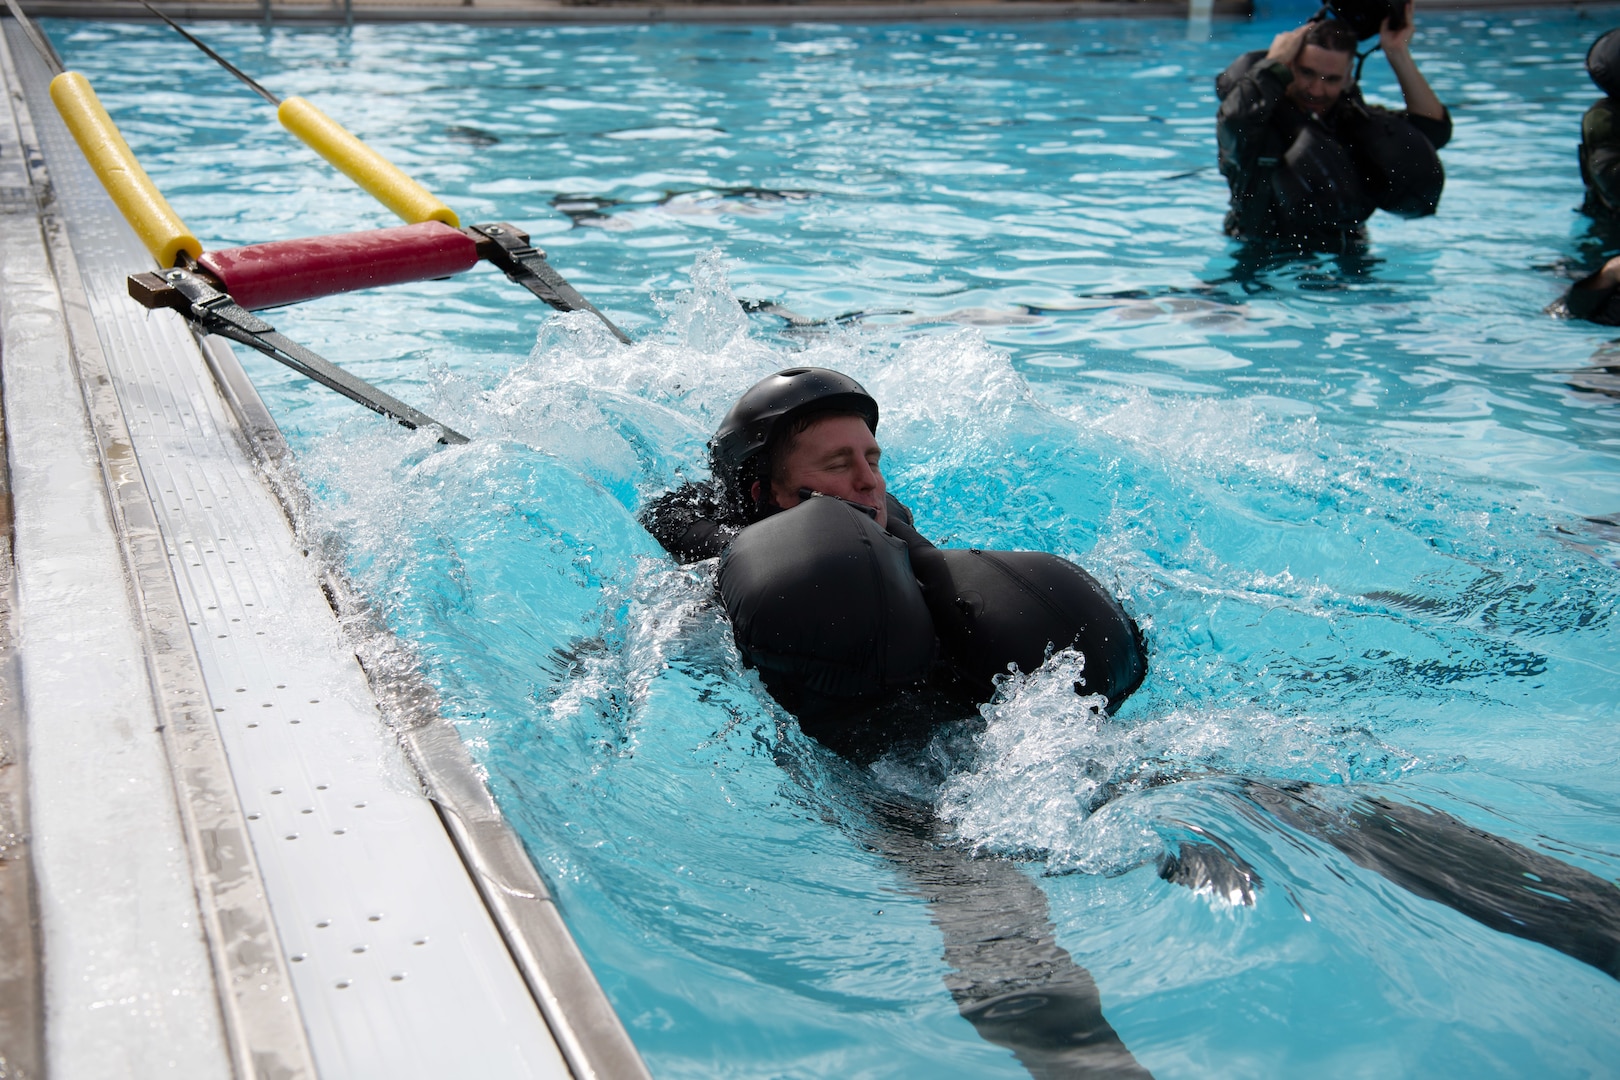 149th Fighter Wing pilots undergo water survival training